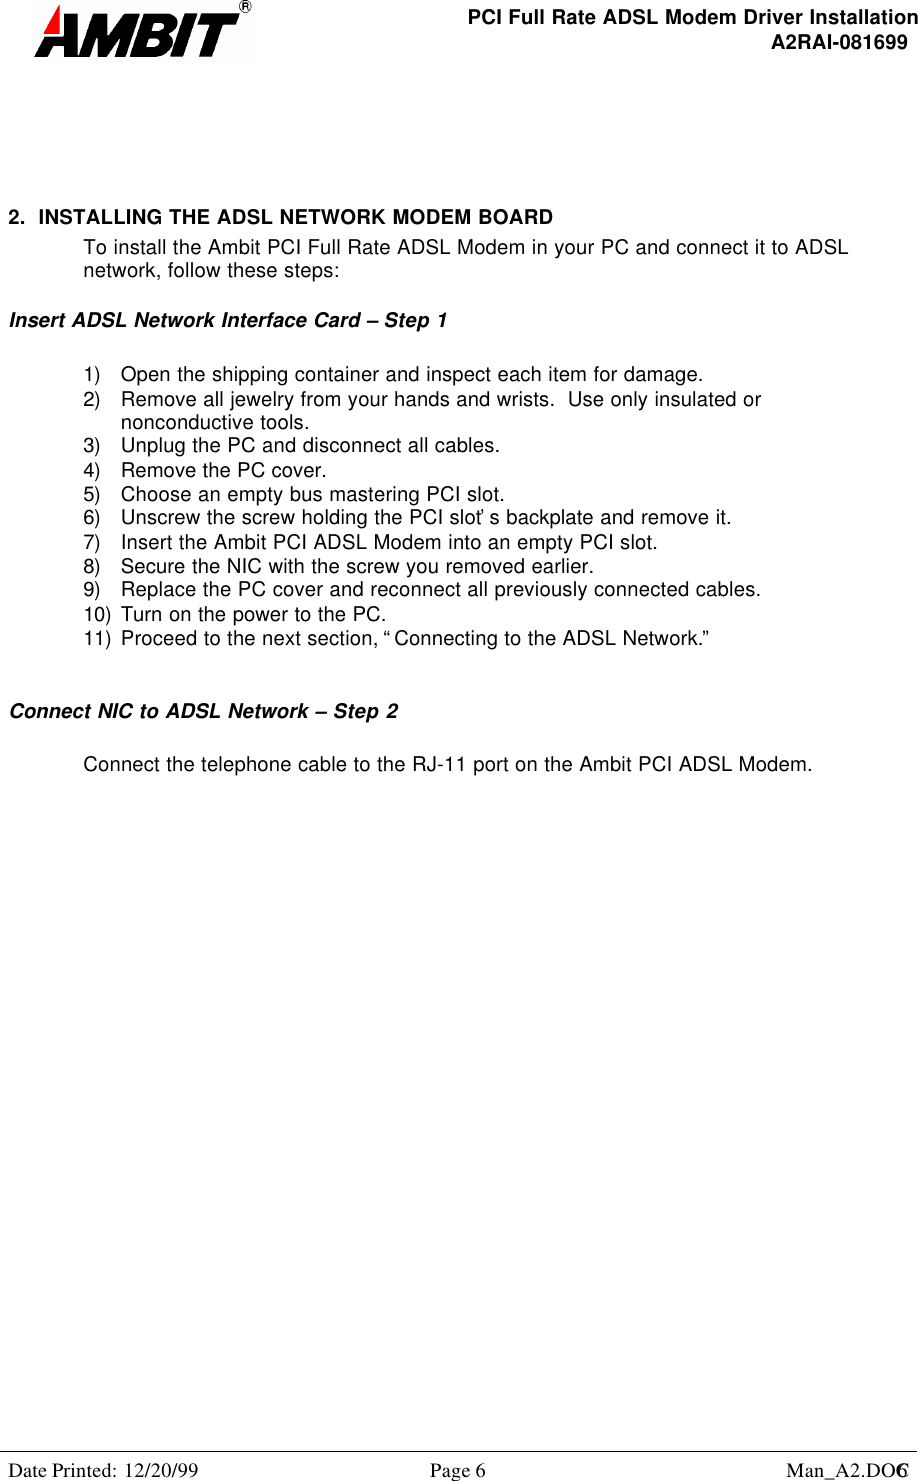 PCI Full Rate ADSL Modem Driver InstallationA2RAI-081699Date Printed: 12/20/99 Page 6 Man_A2.DOC62.  INSTALLING THE ADSL NETWORK MODEM BOARDTo install the Ambit PCI Full Rate ADSL Modem in your PC and connect it to ADSLnetwork, follow these steps:Insert ADSL Network Interface Card – Step 11) Open the shipping container and inspect each item for damage.2) Remove all jewelry from your hands and wrists.  Use only insulated ornonconductive tools.3) Unplug the PC and disconnect all cables.4) Remove the PC cover.5) Choose an empty bus mastering PCI slot.6) Unscrew the screw holding the PCI slot’s backplate and remove it.7) Insert the Ambit PCI ADSL Modem into an empty PCI slot.8) Secure the NIC with the screw you removed earlier.9) Replace the PC cover and reconnect all previously connected cables.10) Turn on the power to the PC.11) Proceed to the next section, “Connecting to the ADSL Network.”Connect NIC to ADSL Network – Step 2Connect the telephone cable to the RJ-11 port on the Ambit PCI ADSL Modem.